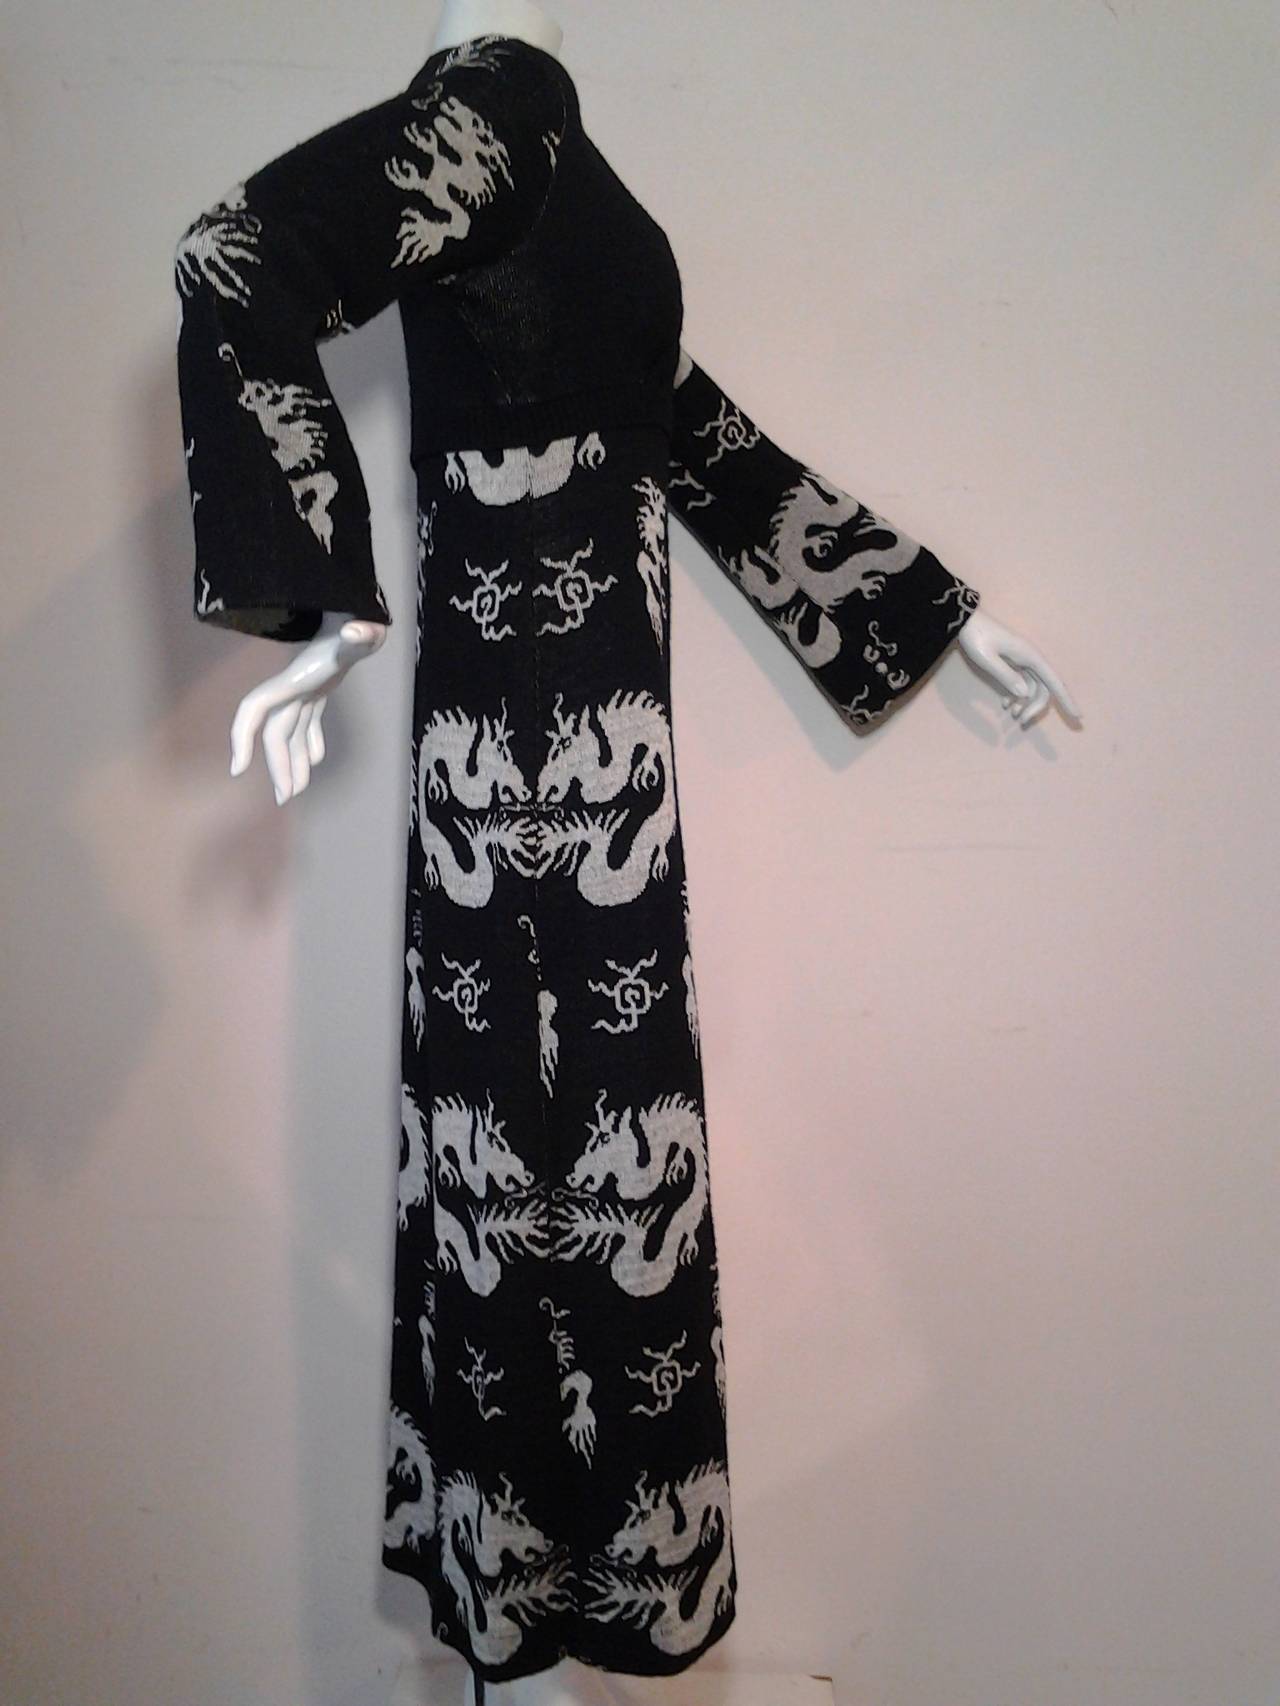 1970s Giorgio Sant Angelo kimono-inspired knit empire waist maxi dress.  Wrap neckline, flared cuffs, and side slit.  Fabulous dragon motif knitted in overall.